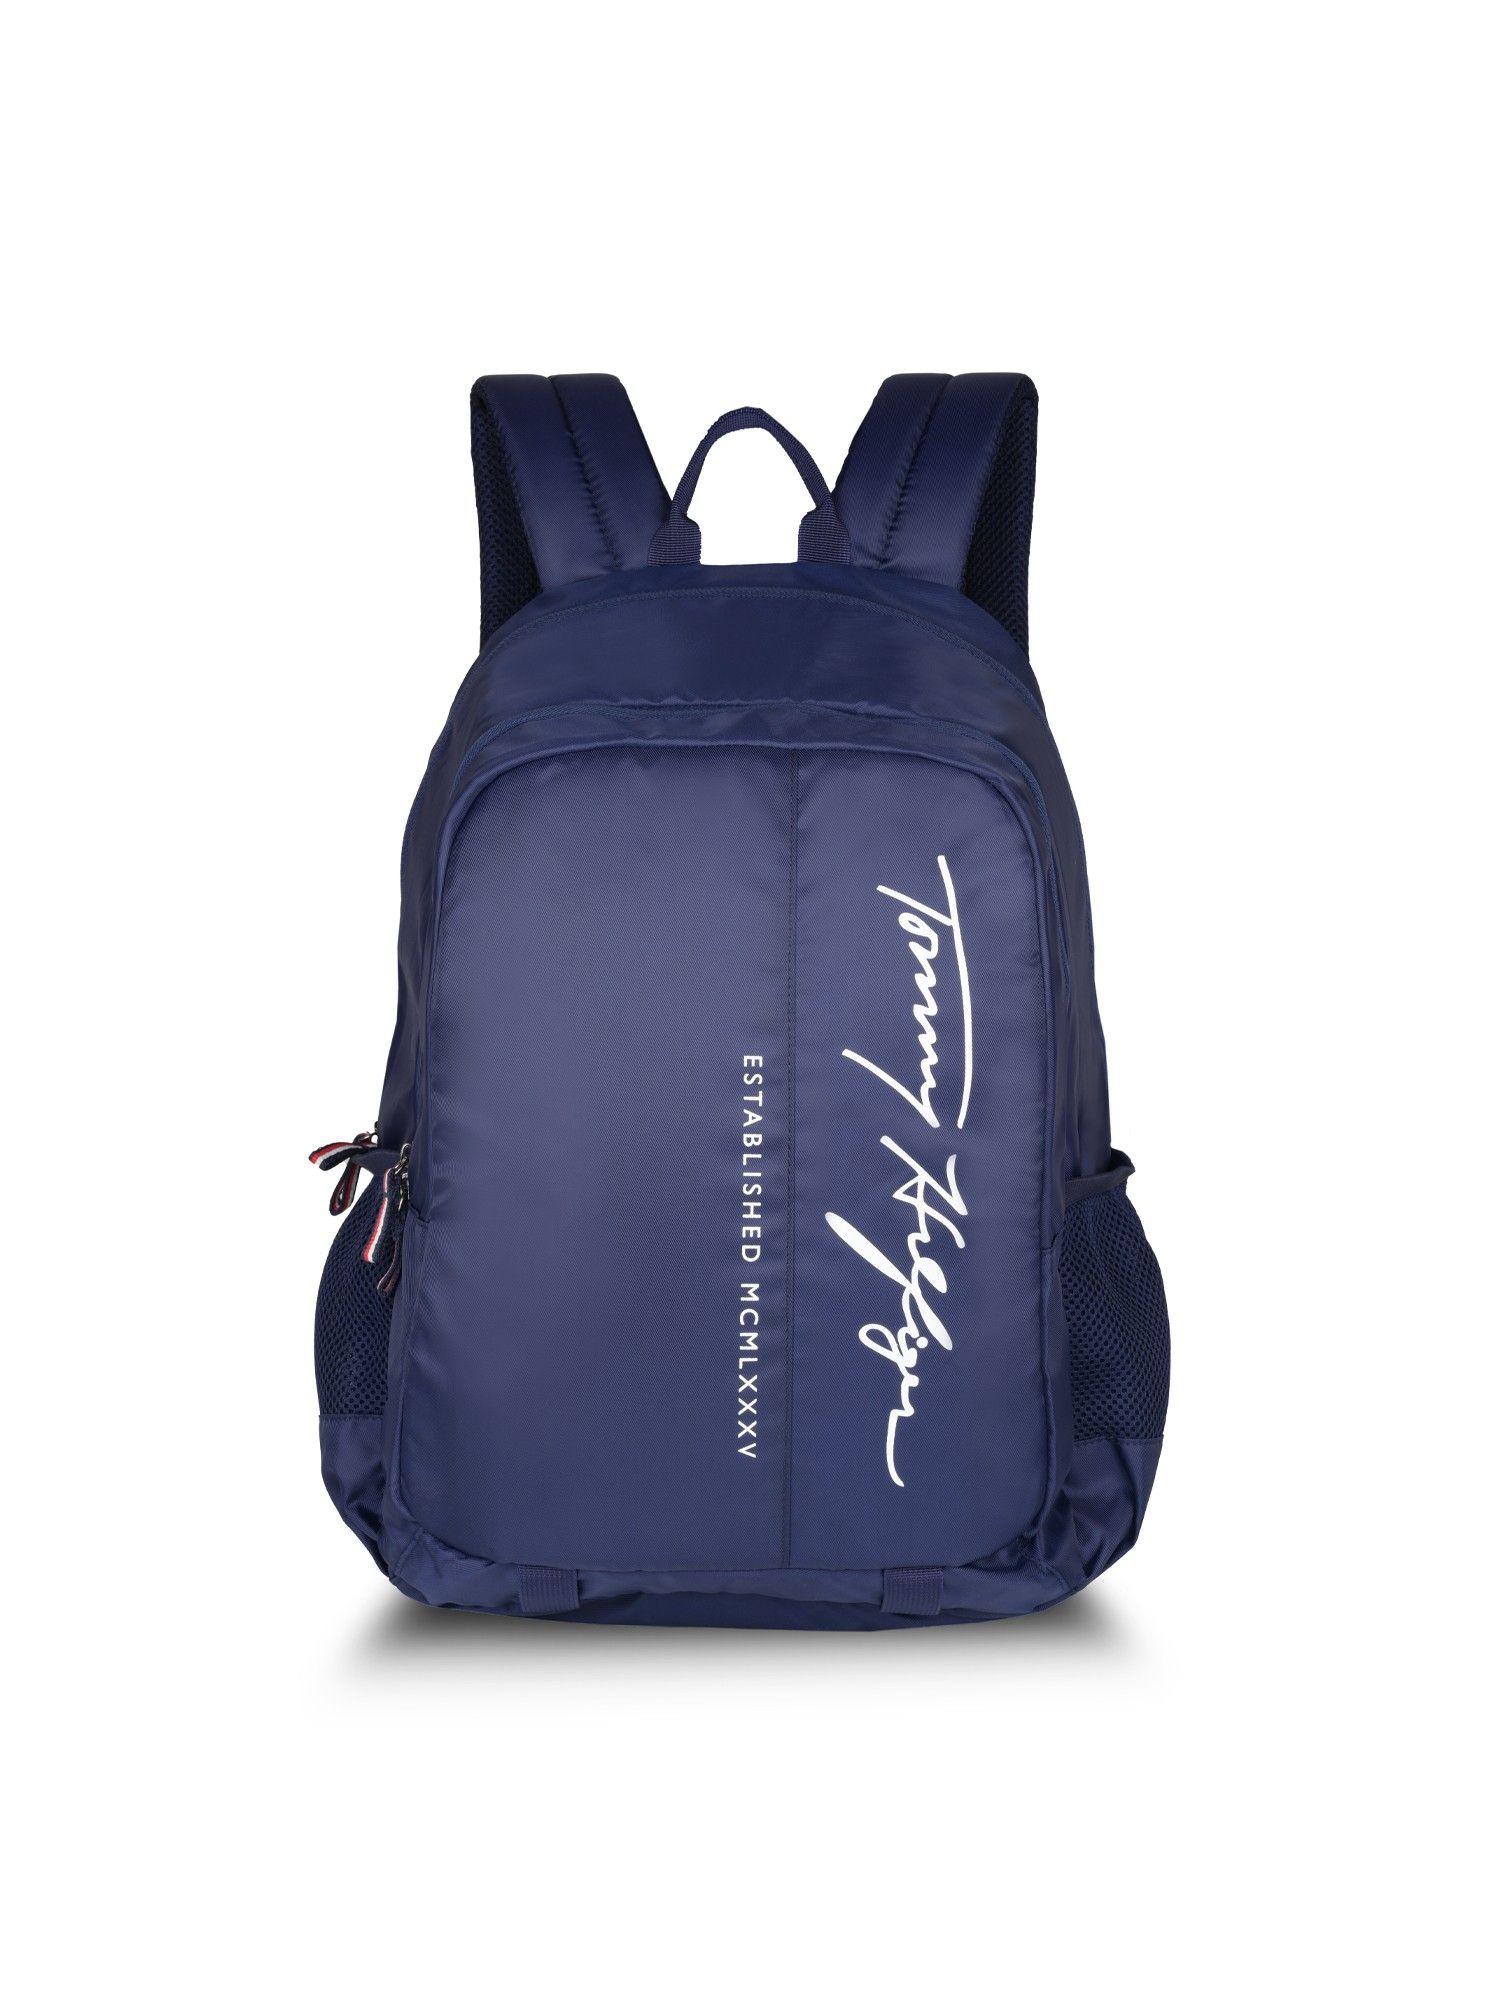 haiden laptop backpack printed navy blue 8903496179507